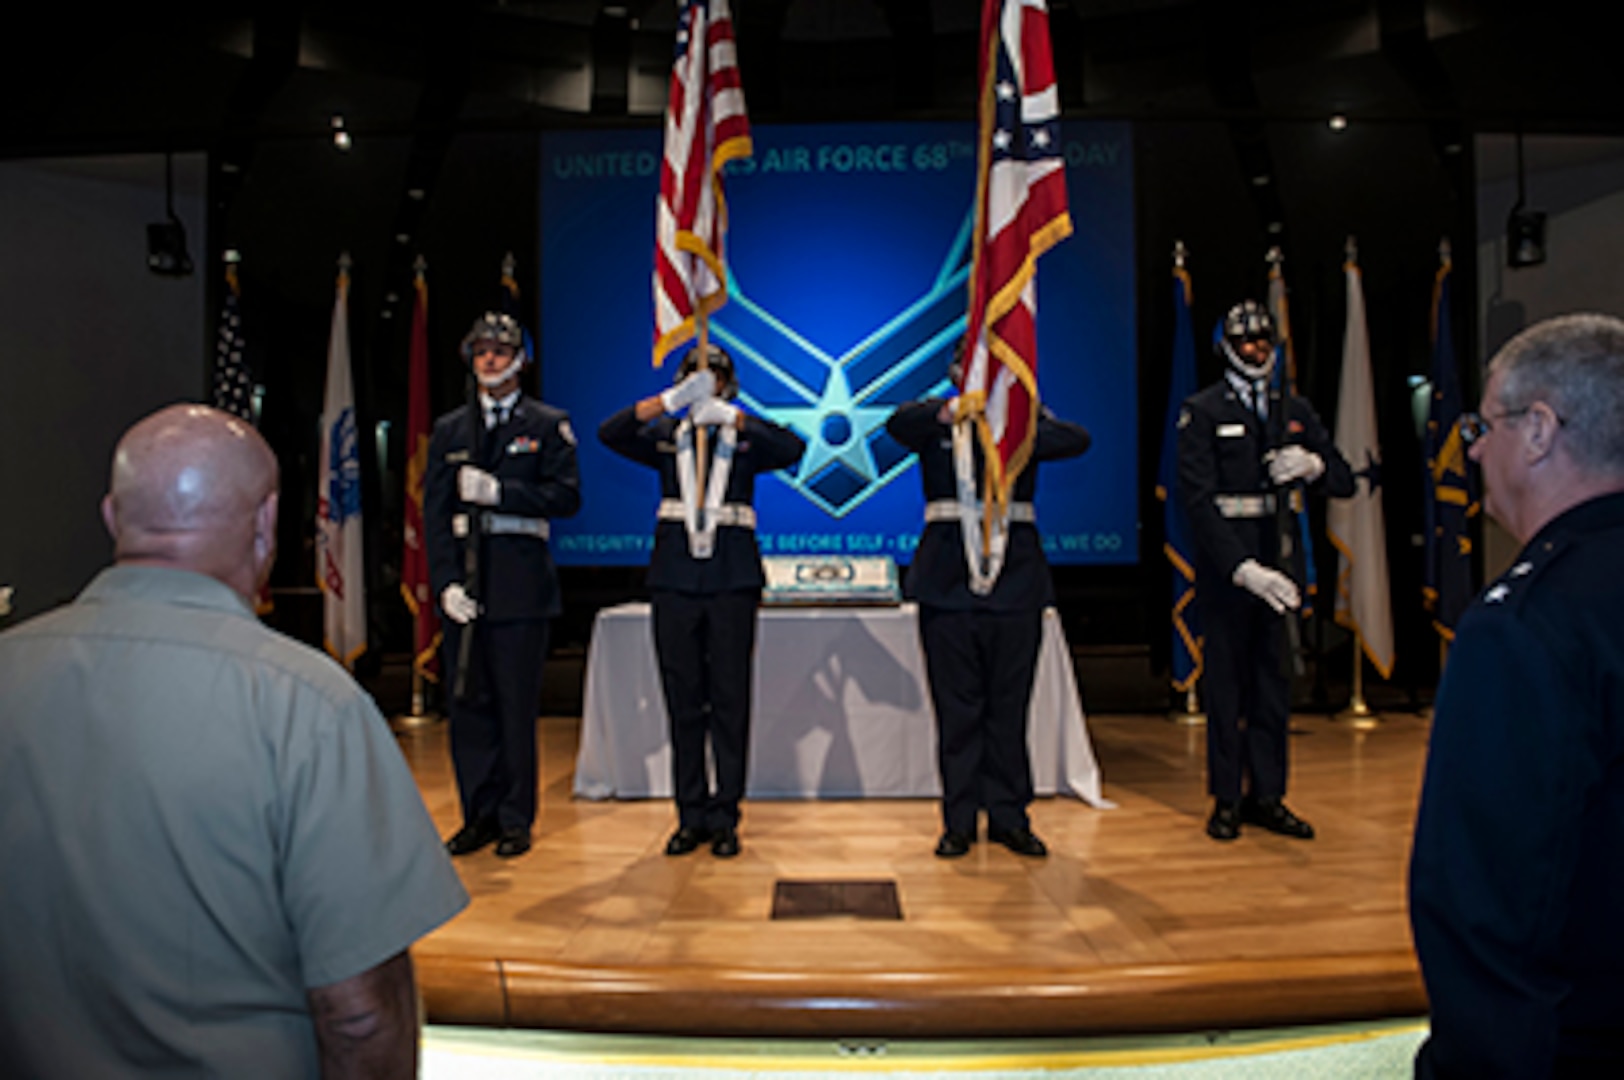 Members of the Air Force Junior ROTC OH-871 present the colors to kick off DLA Land and Maritime’s Air Force 68th birthday celebration Sept. 17 in the Building 20 auditorium. In the foreground is Navy Rear Adm. John King (left), Land and Maritime commander, and Air Force Maj. Gen. Mark Bartman, Adjutant General, Ohio National Guard. 